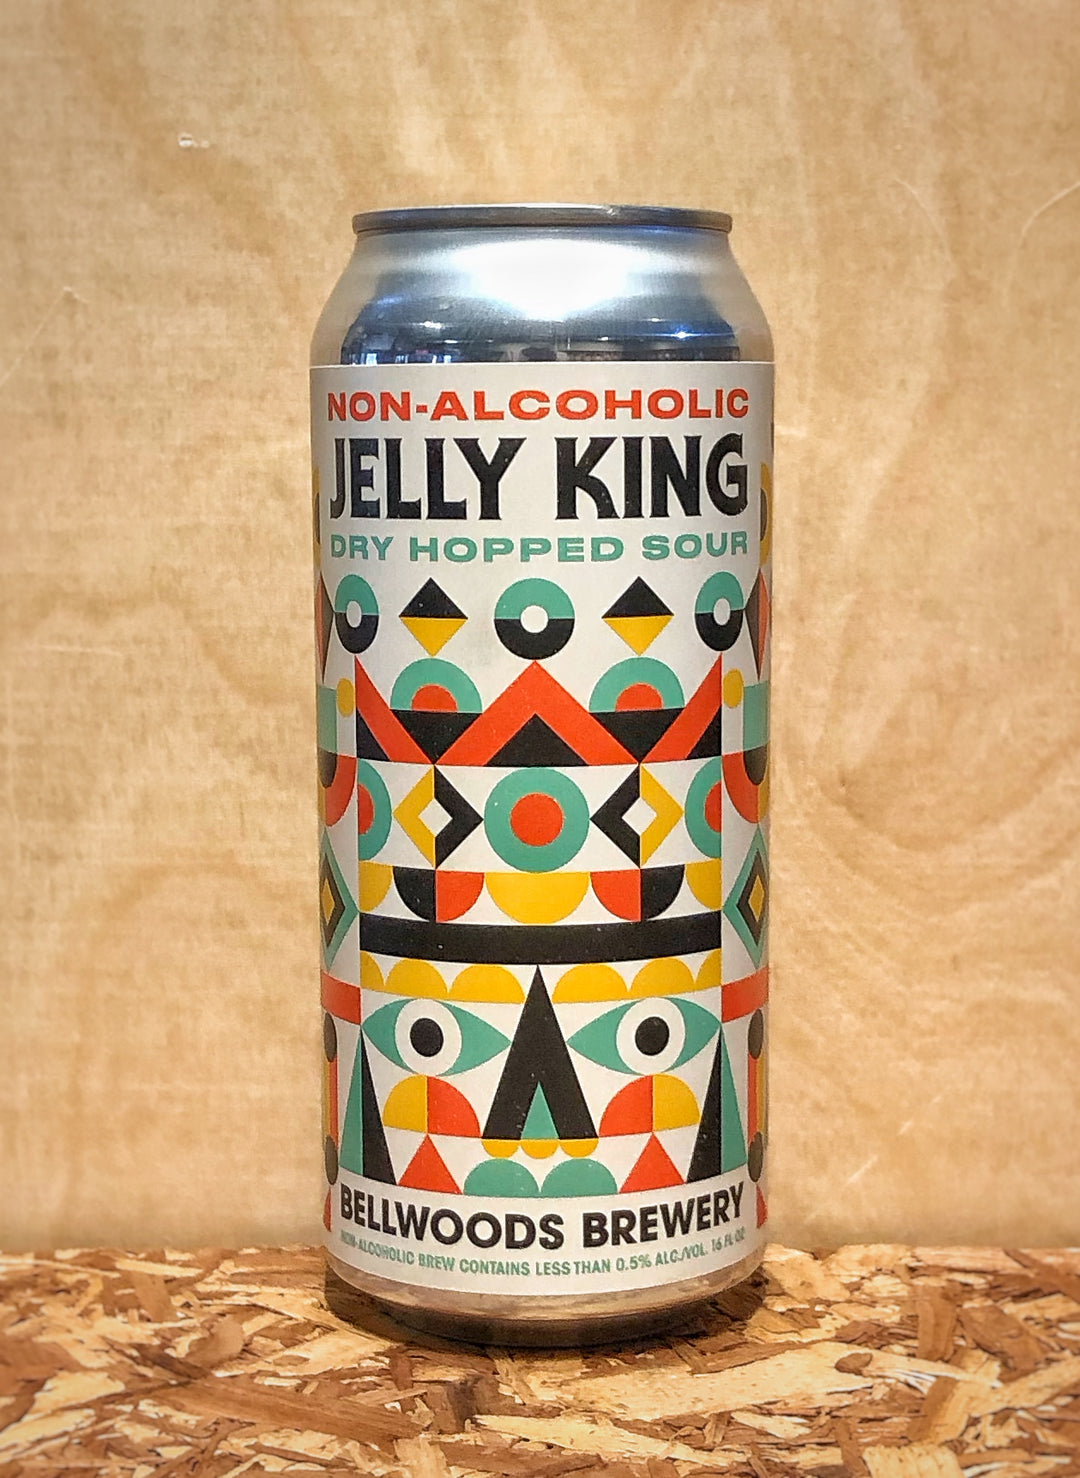 Bellwoods Brewery Non-Alcoholic 'Jelly King' Dry-Hopped Sour (Toronto, Ontario)